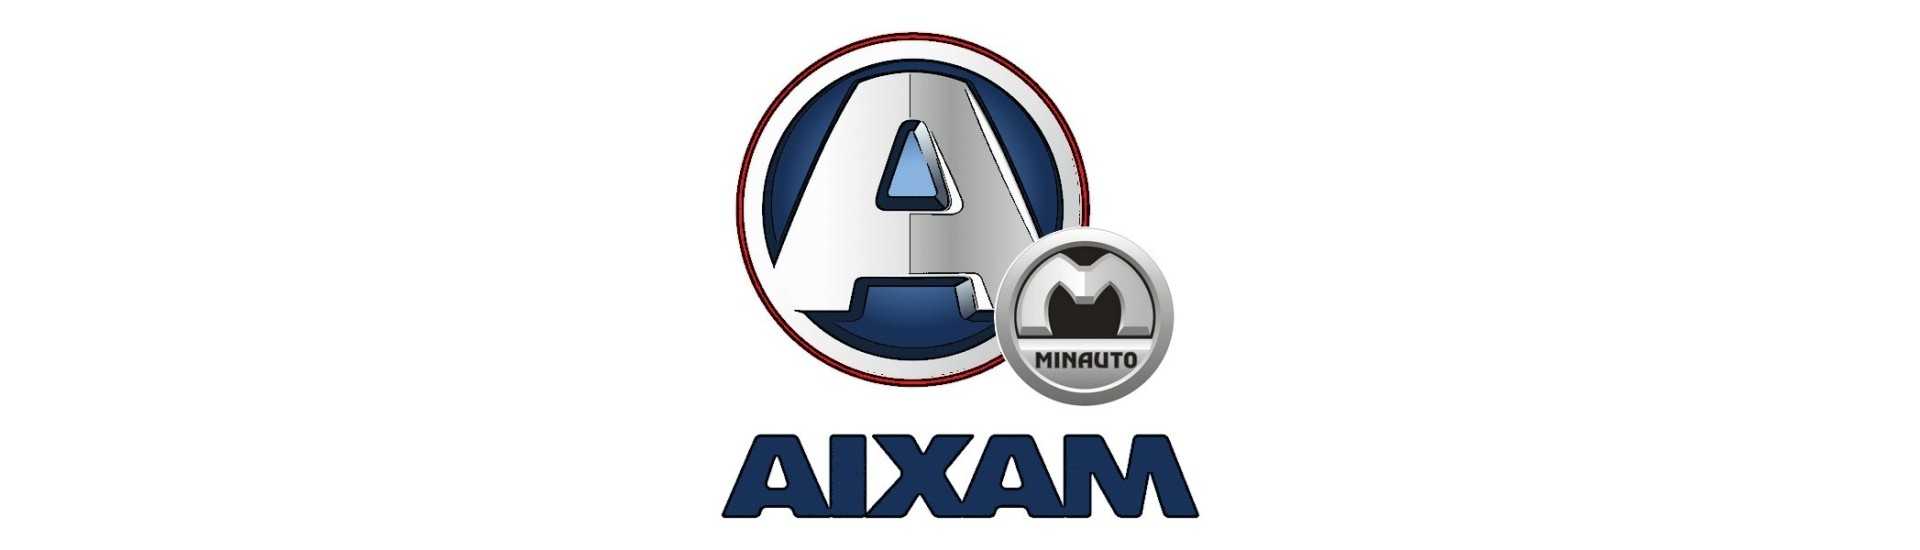 Accelerator cable at the best price without a permit Aixam Minauto